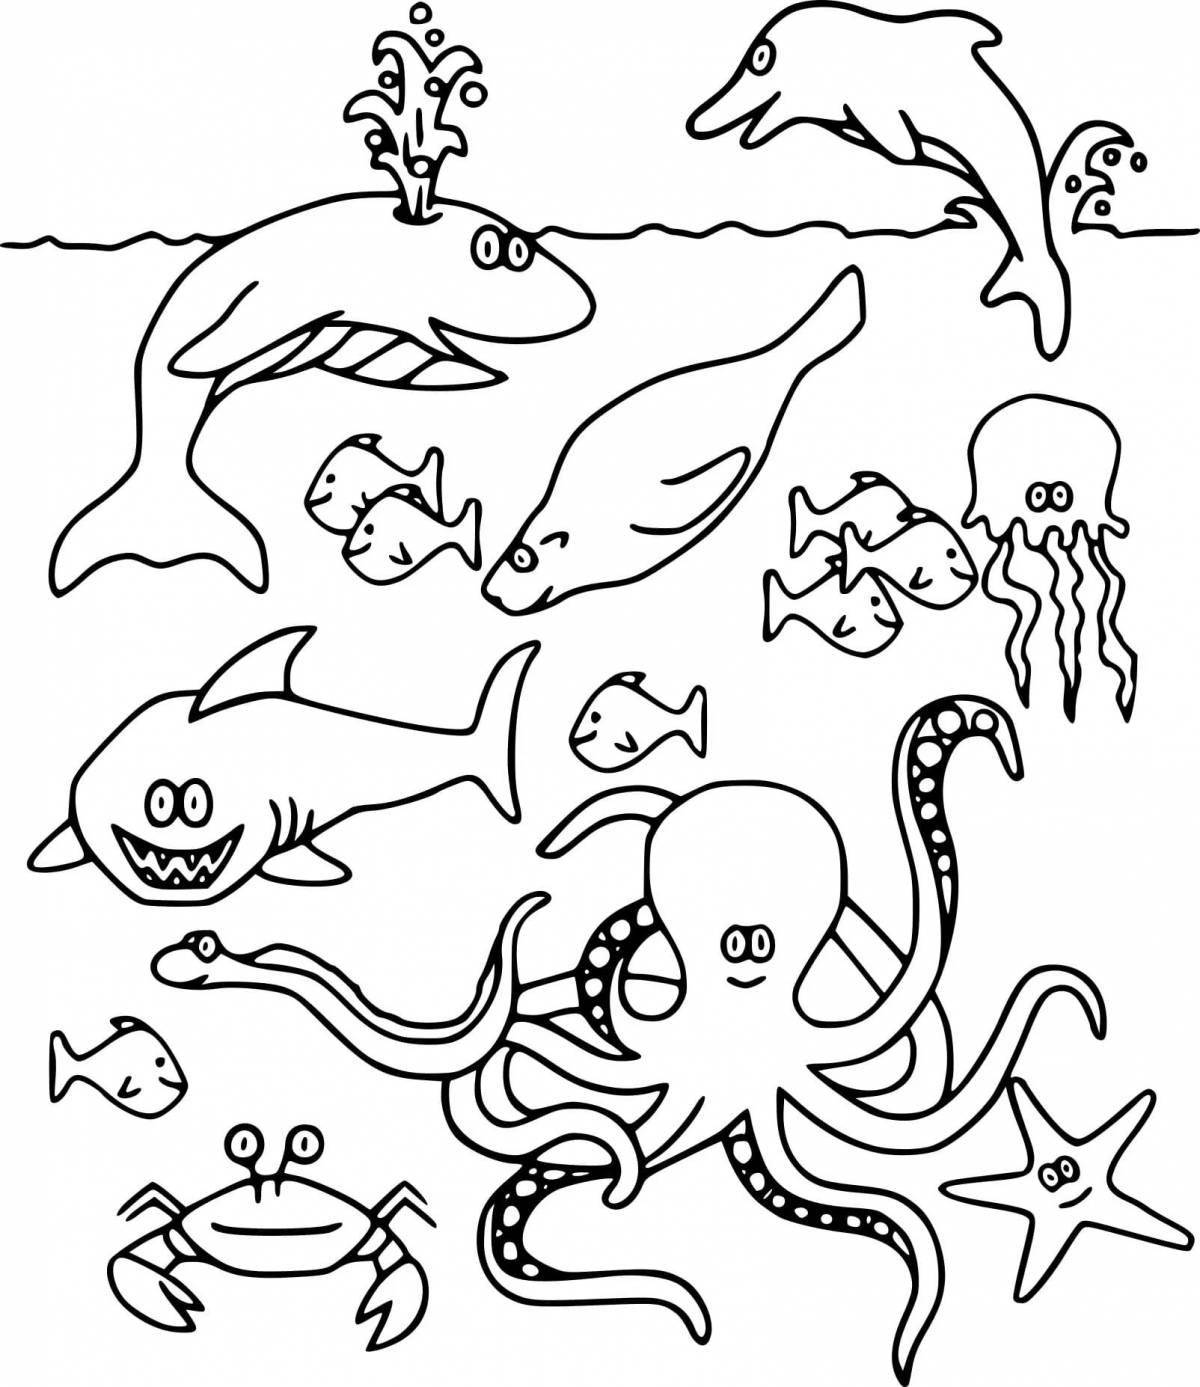 Inhabitants of the seas and oceans for children #3